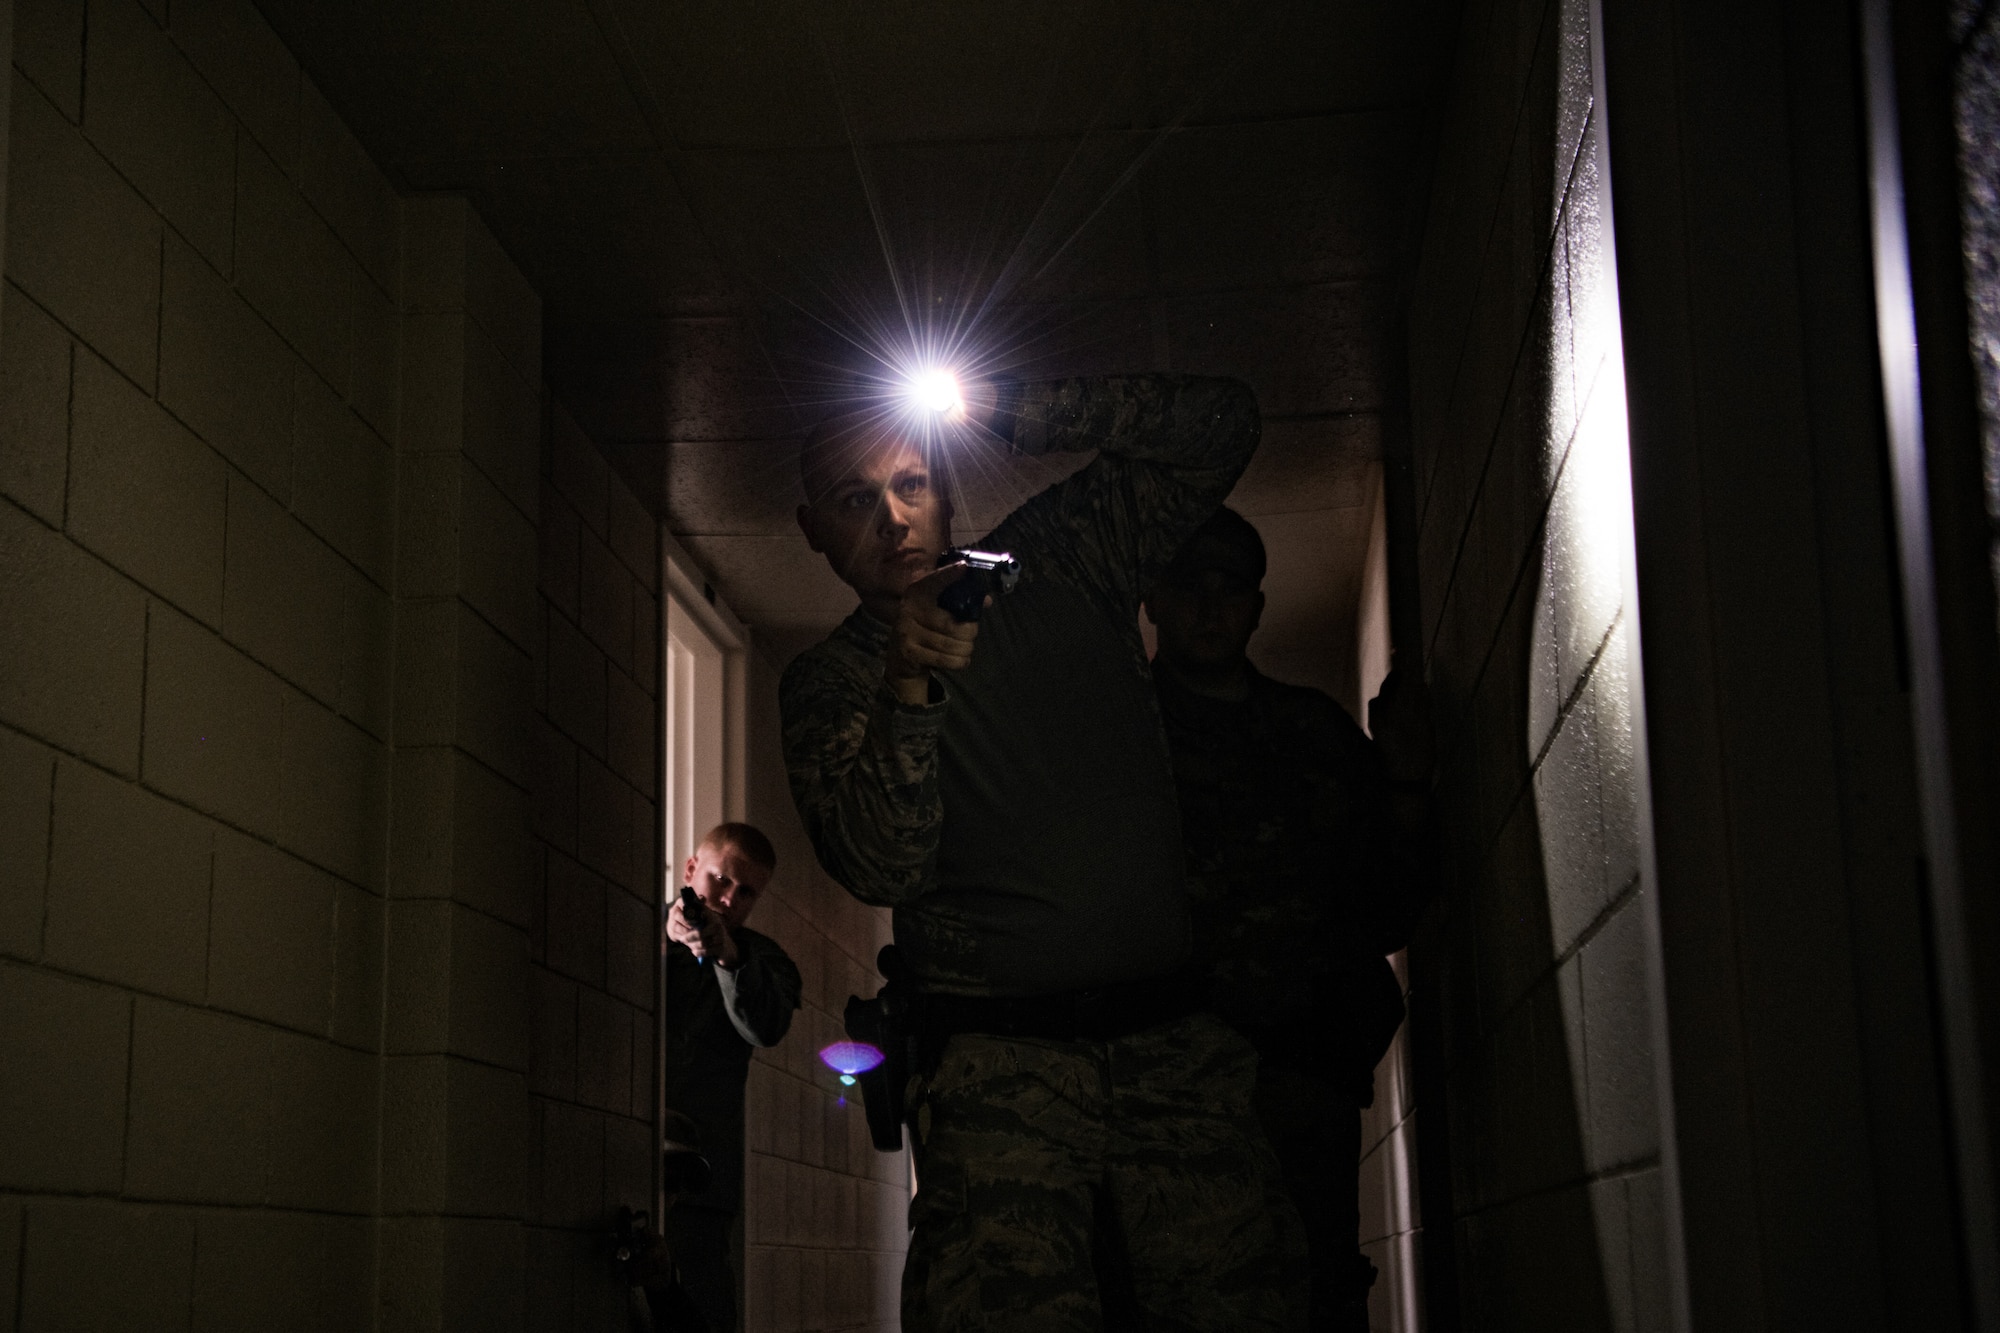 Four participants in SWAT training conducted by the Oklahoma County Sheriff's Office slowly work to clear a dormitory rooms in a hallway while looking for an instructor who is acting as an armed threat at Southern Nazarene University in Bethany, Okla., on Nov. 5, 2019. The two SWAT team members from Ardmore Police Department in Ardmore, Okla., secured the hallway as two members of the 137th Special Operations Security Forces Squadron approach a doorway. 



Nick Deniwellis (lower left), of Ardmore SWAT, crouches in front of Jared Johnson, also with Ardmore SWAT, as both hold the hallway for Staff Sgt. James Lunsford (right), with the 137th SOSFS, and Senior Airman Michael Ragland (center), with the 137th SOSFS, as they approach an unsecured doorway. This was Ragland’s first time in SWAT training, and he is working in a career field close to his heart: His grandfather was a highway patrolman in North Carolina for 8 years and was inspired to join this career field when he came into the military because of his grandfather. Additionally, Johnson was a Marine Corps infantryman before leaving the military and becoming a K-9 officer with the same department his dad retired from as a captain after 22 years of service in Ardmore. Both Ragland and Johnson bonded over that shared experience of joining a career field inspired by their family members who served in law enforcement. (U.S. Air National Guard photo by Staff Sgt. Brigette Waltermire)